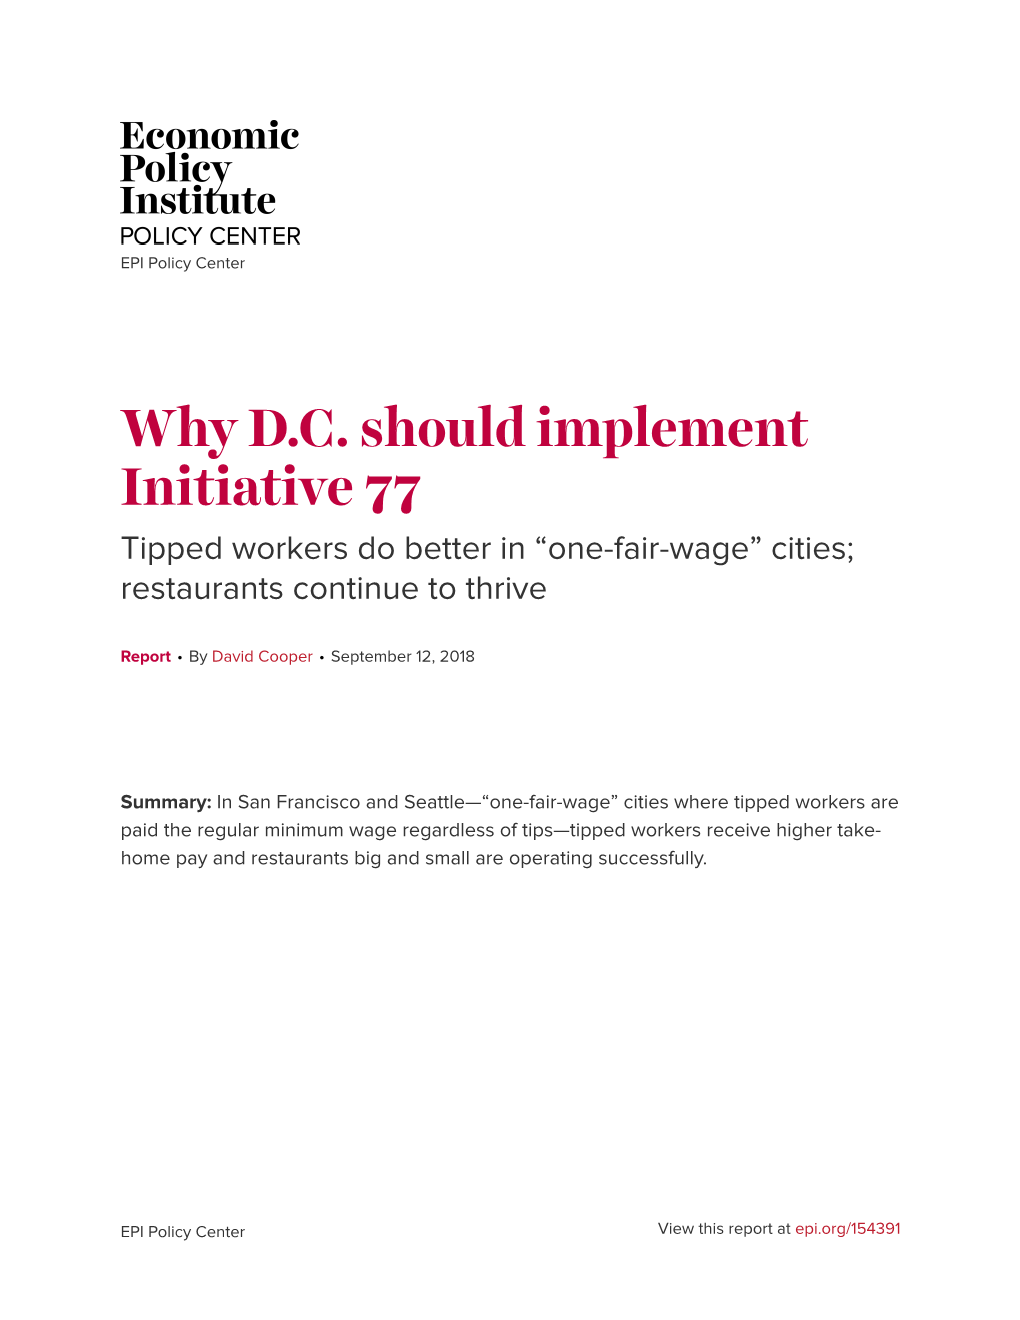 Why D.C. Should Implement Initiative 77: Tipped Workers Do Better In